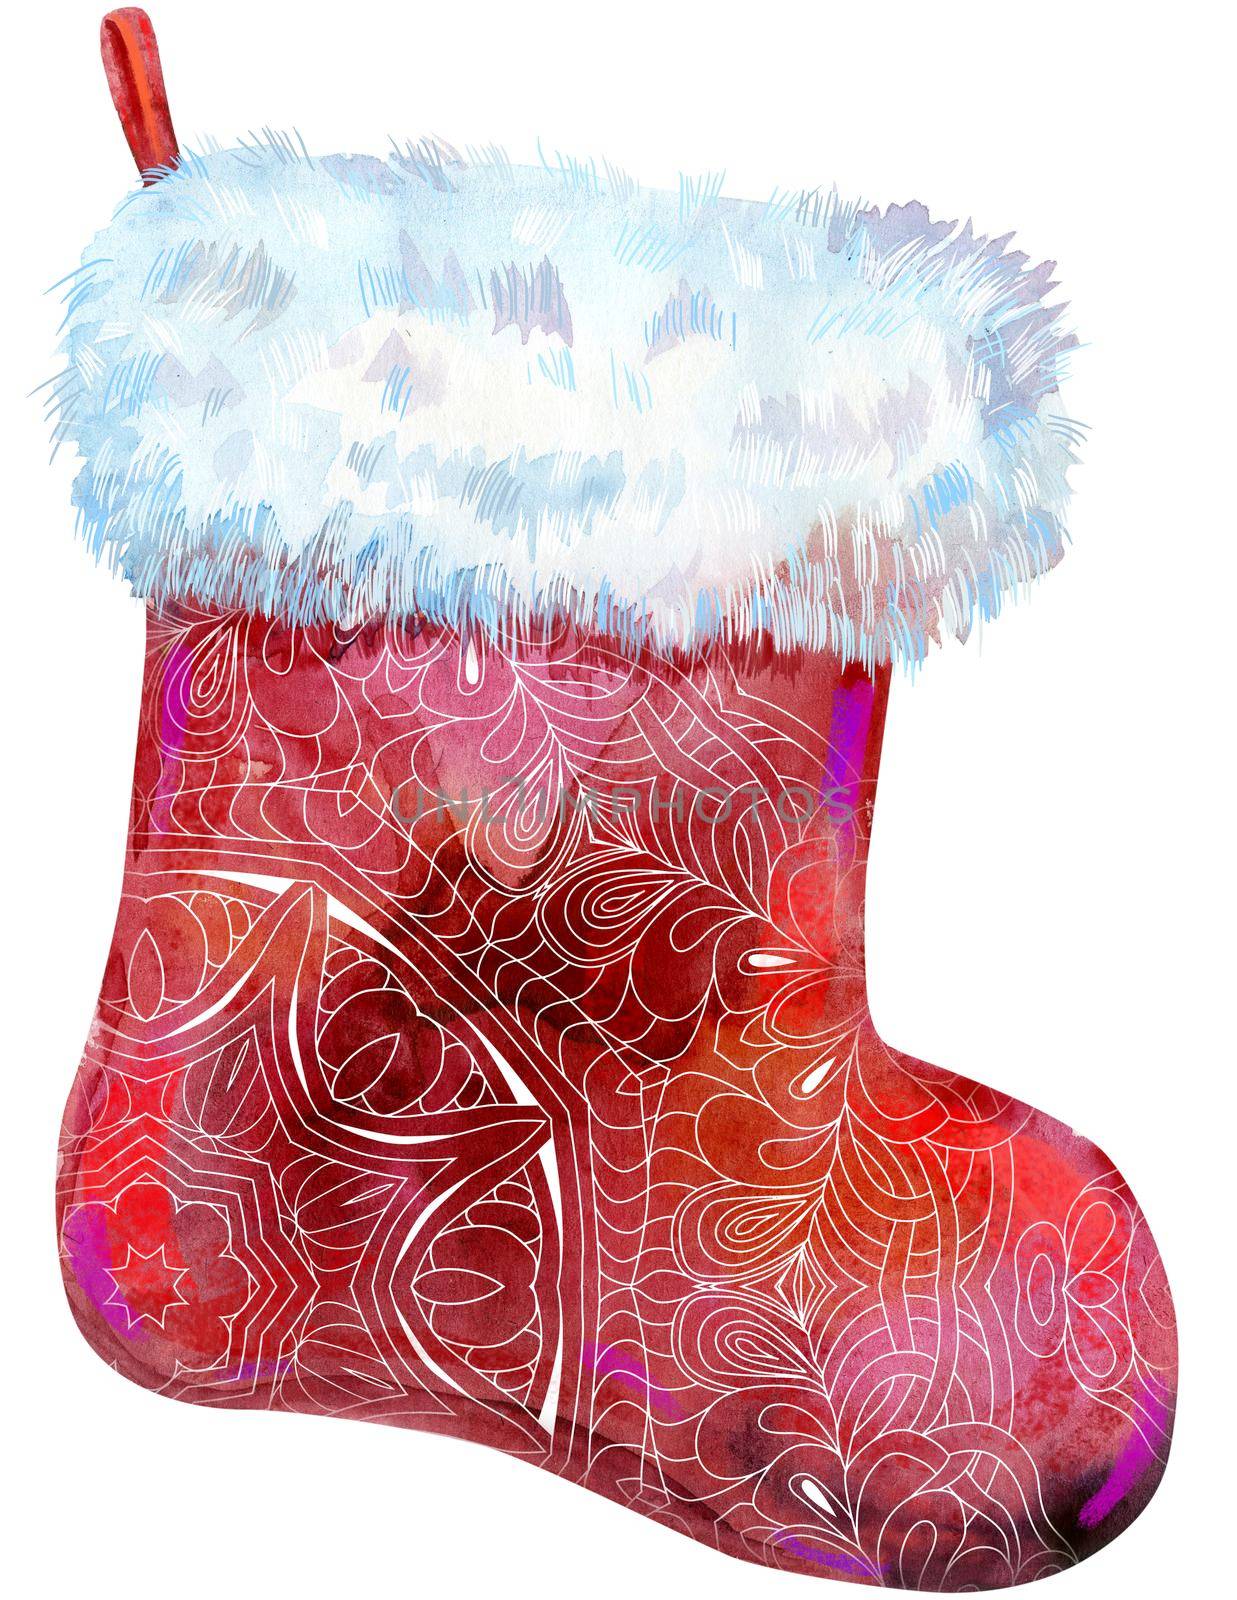 Christmas red patterned sock with white fur. Watercolor illustration. Isolated. by NataOmsk